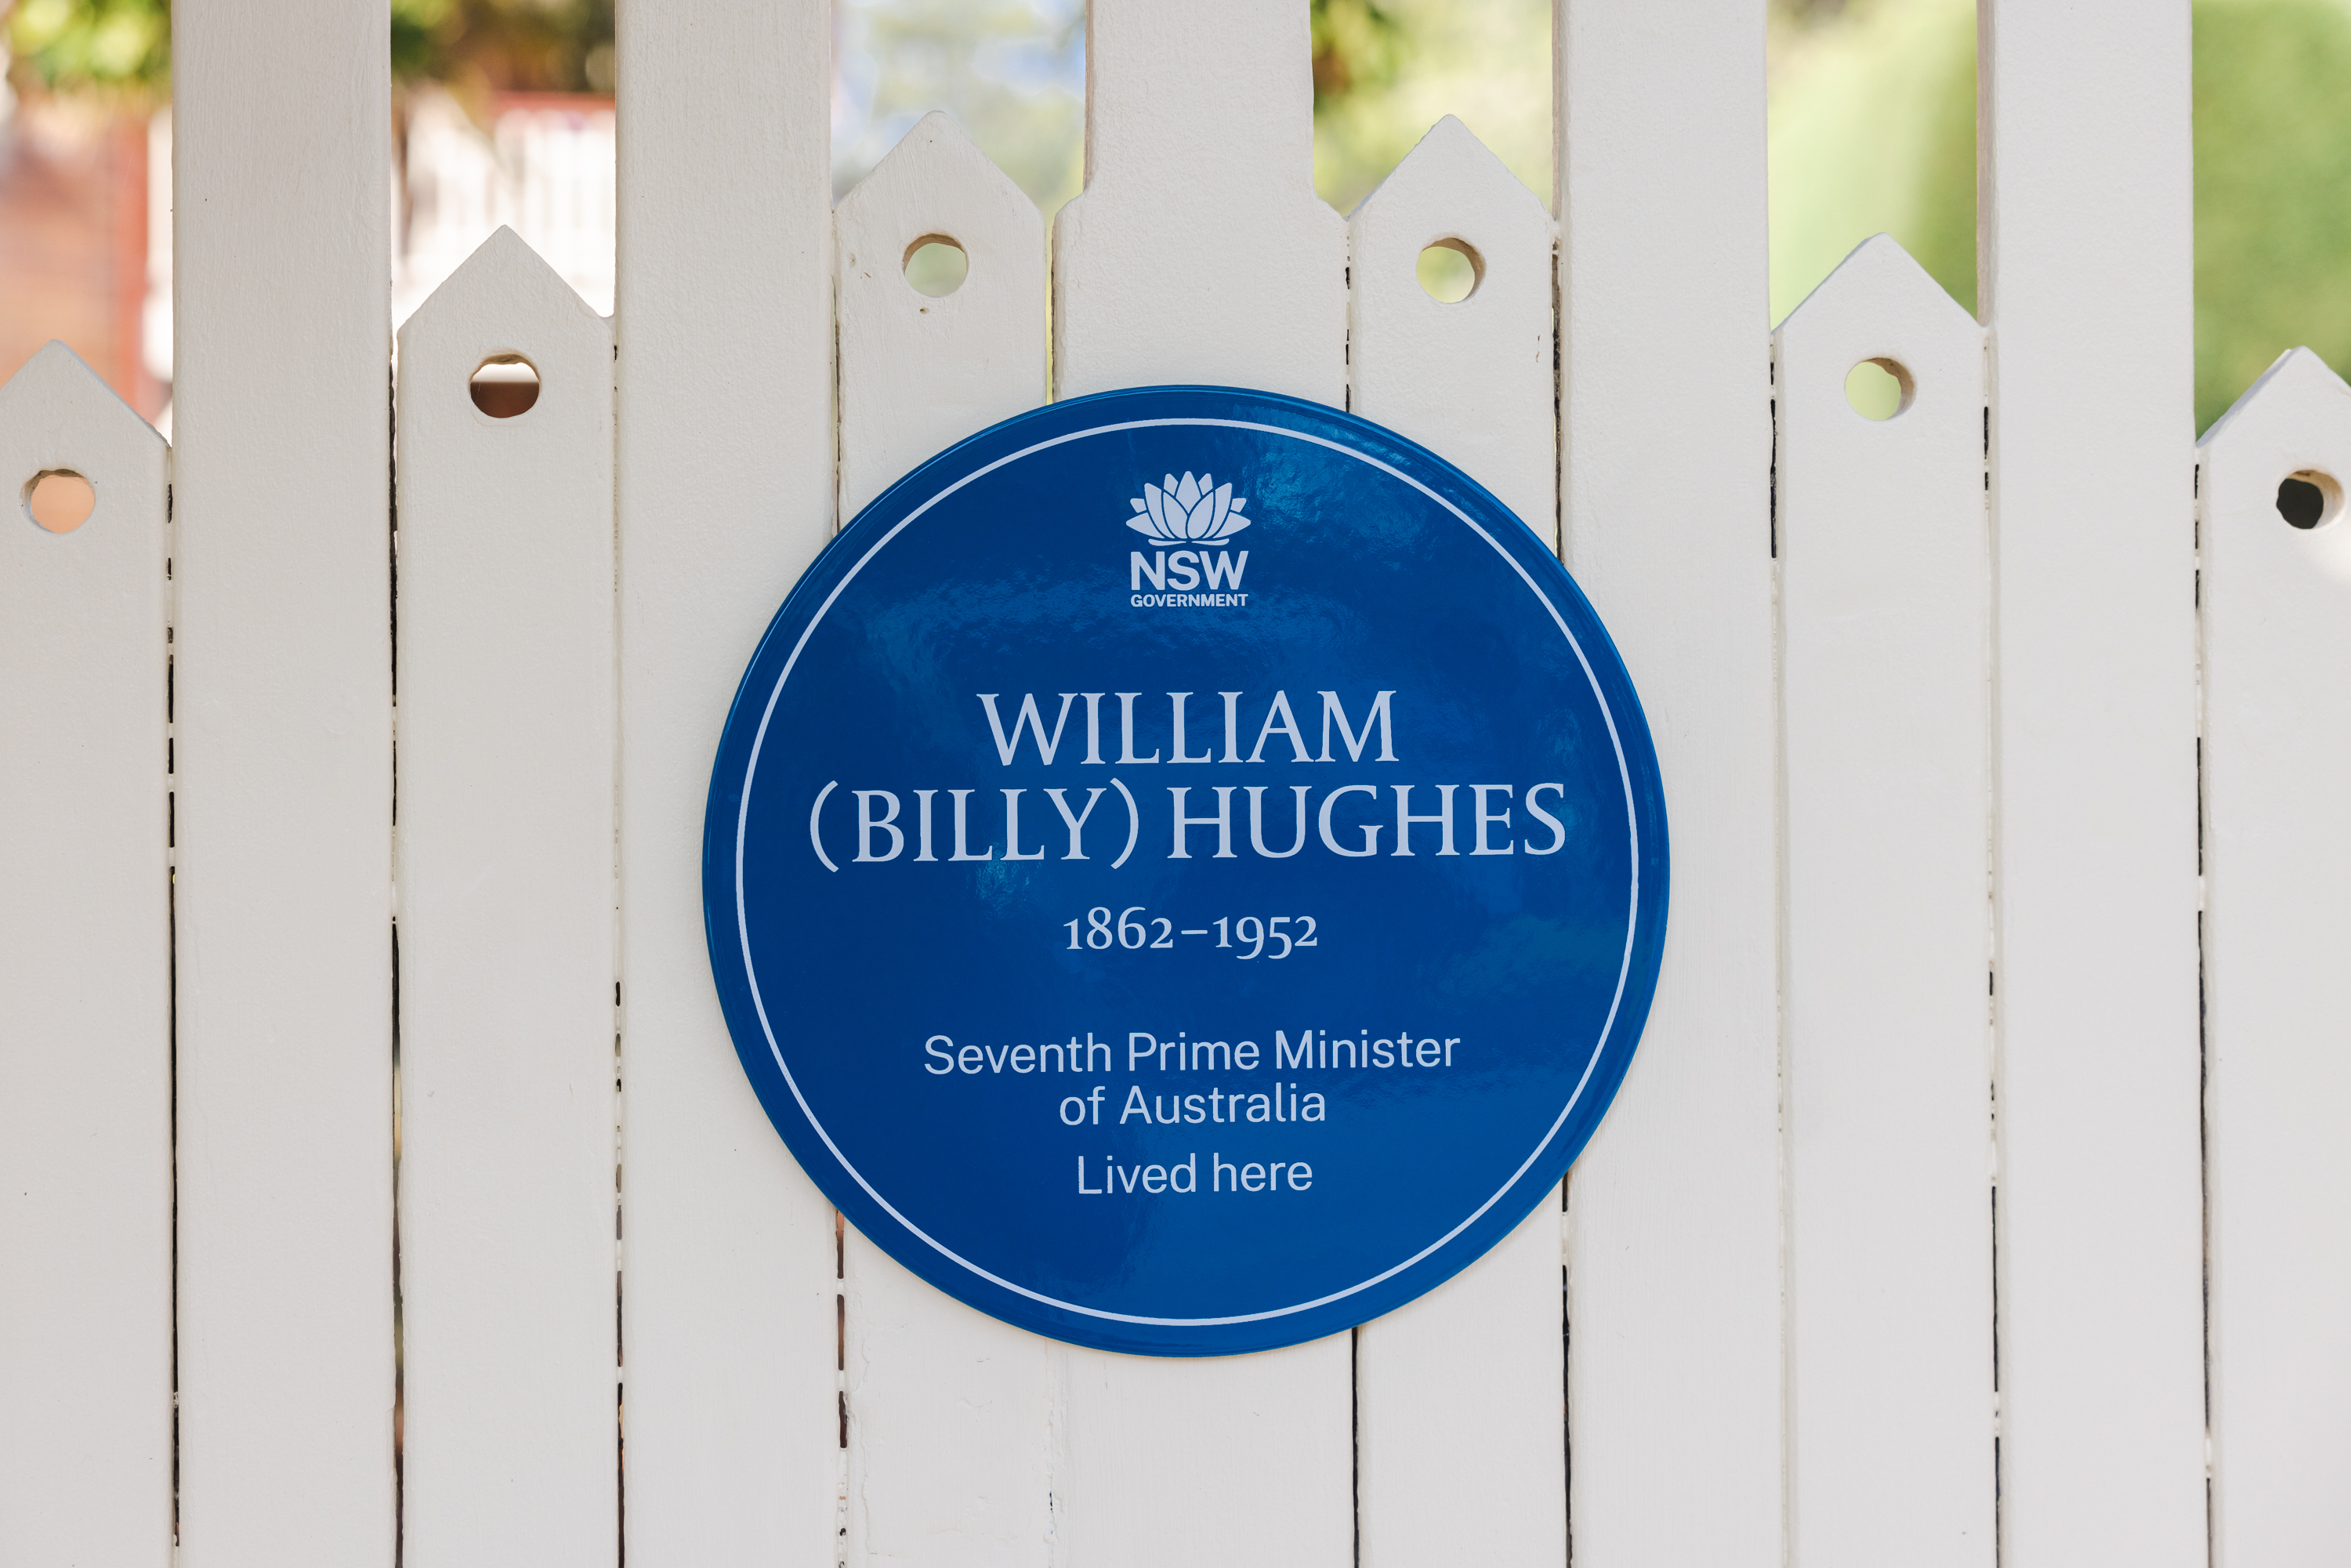 Image 6 of 6 - A blue plaque for Billy Hughes on a white picket fence gate